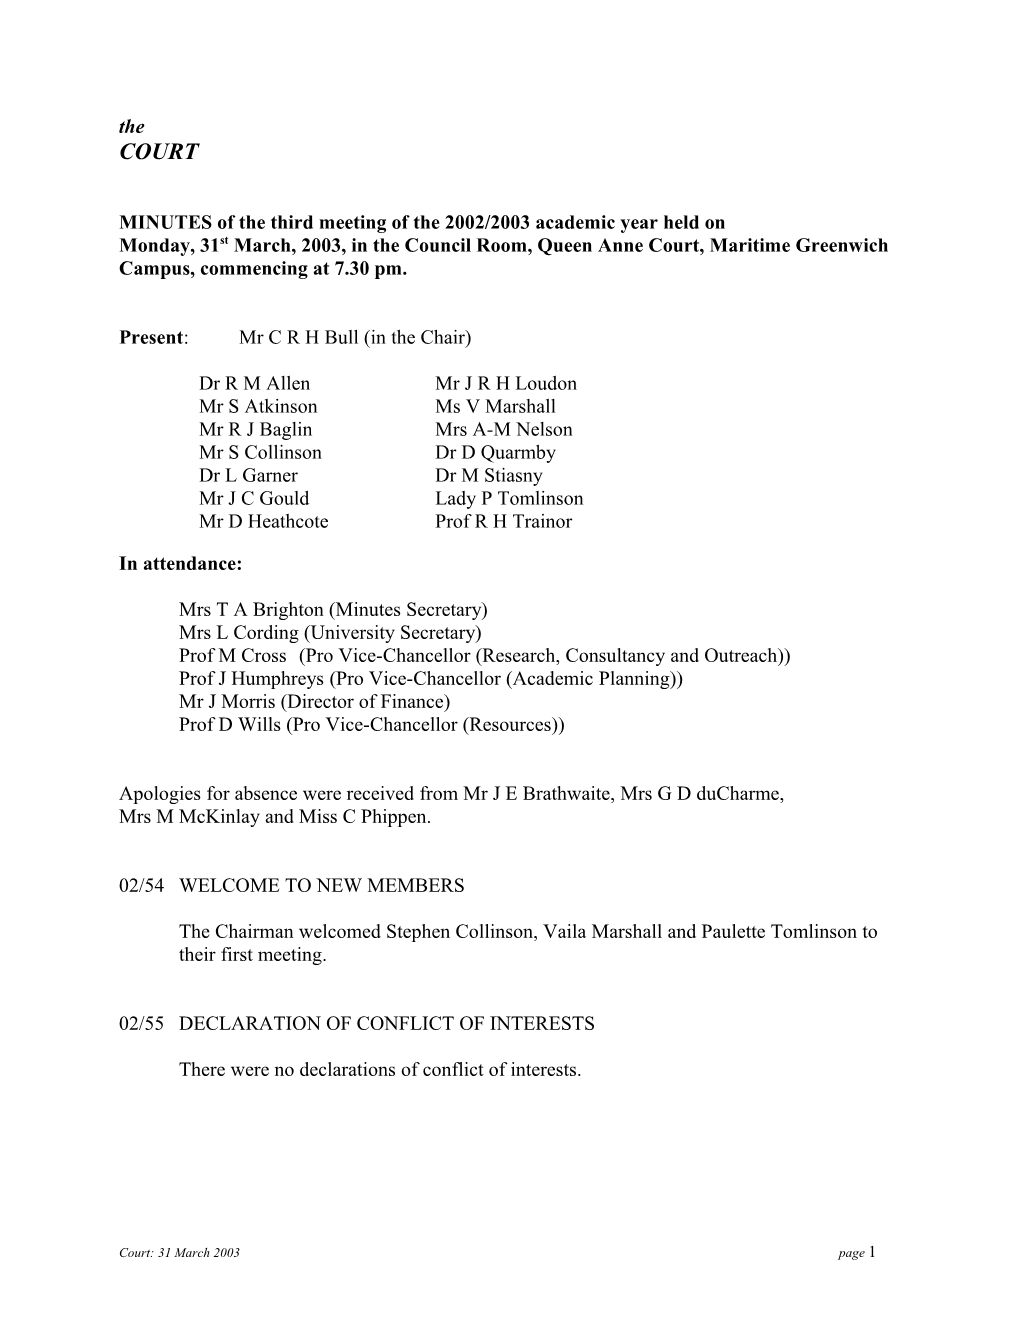 MINUTES of the Third Meeting of the 2002/2003 Academic Year Held On